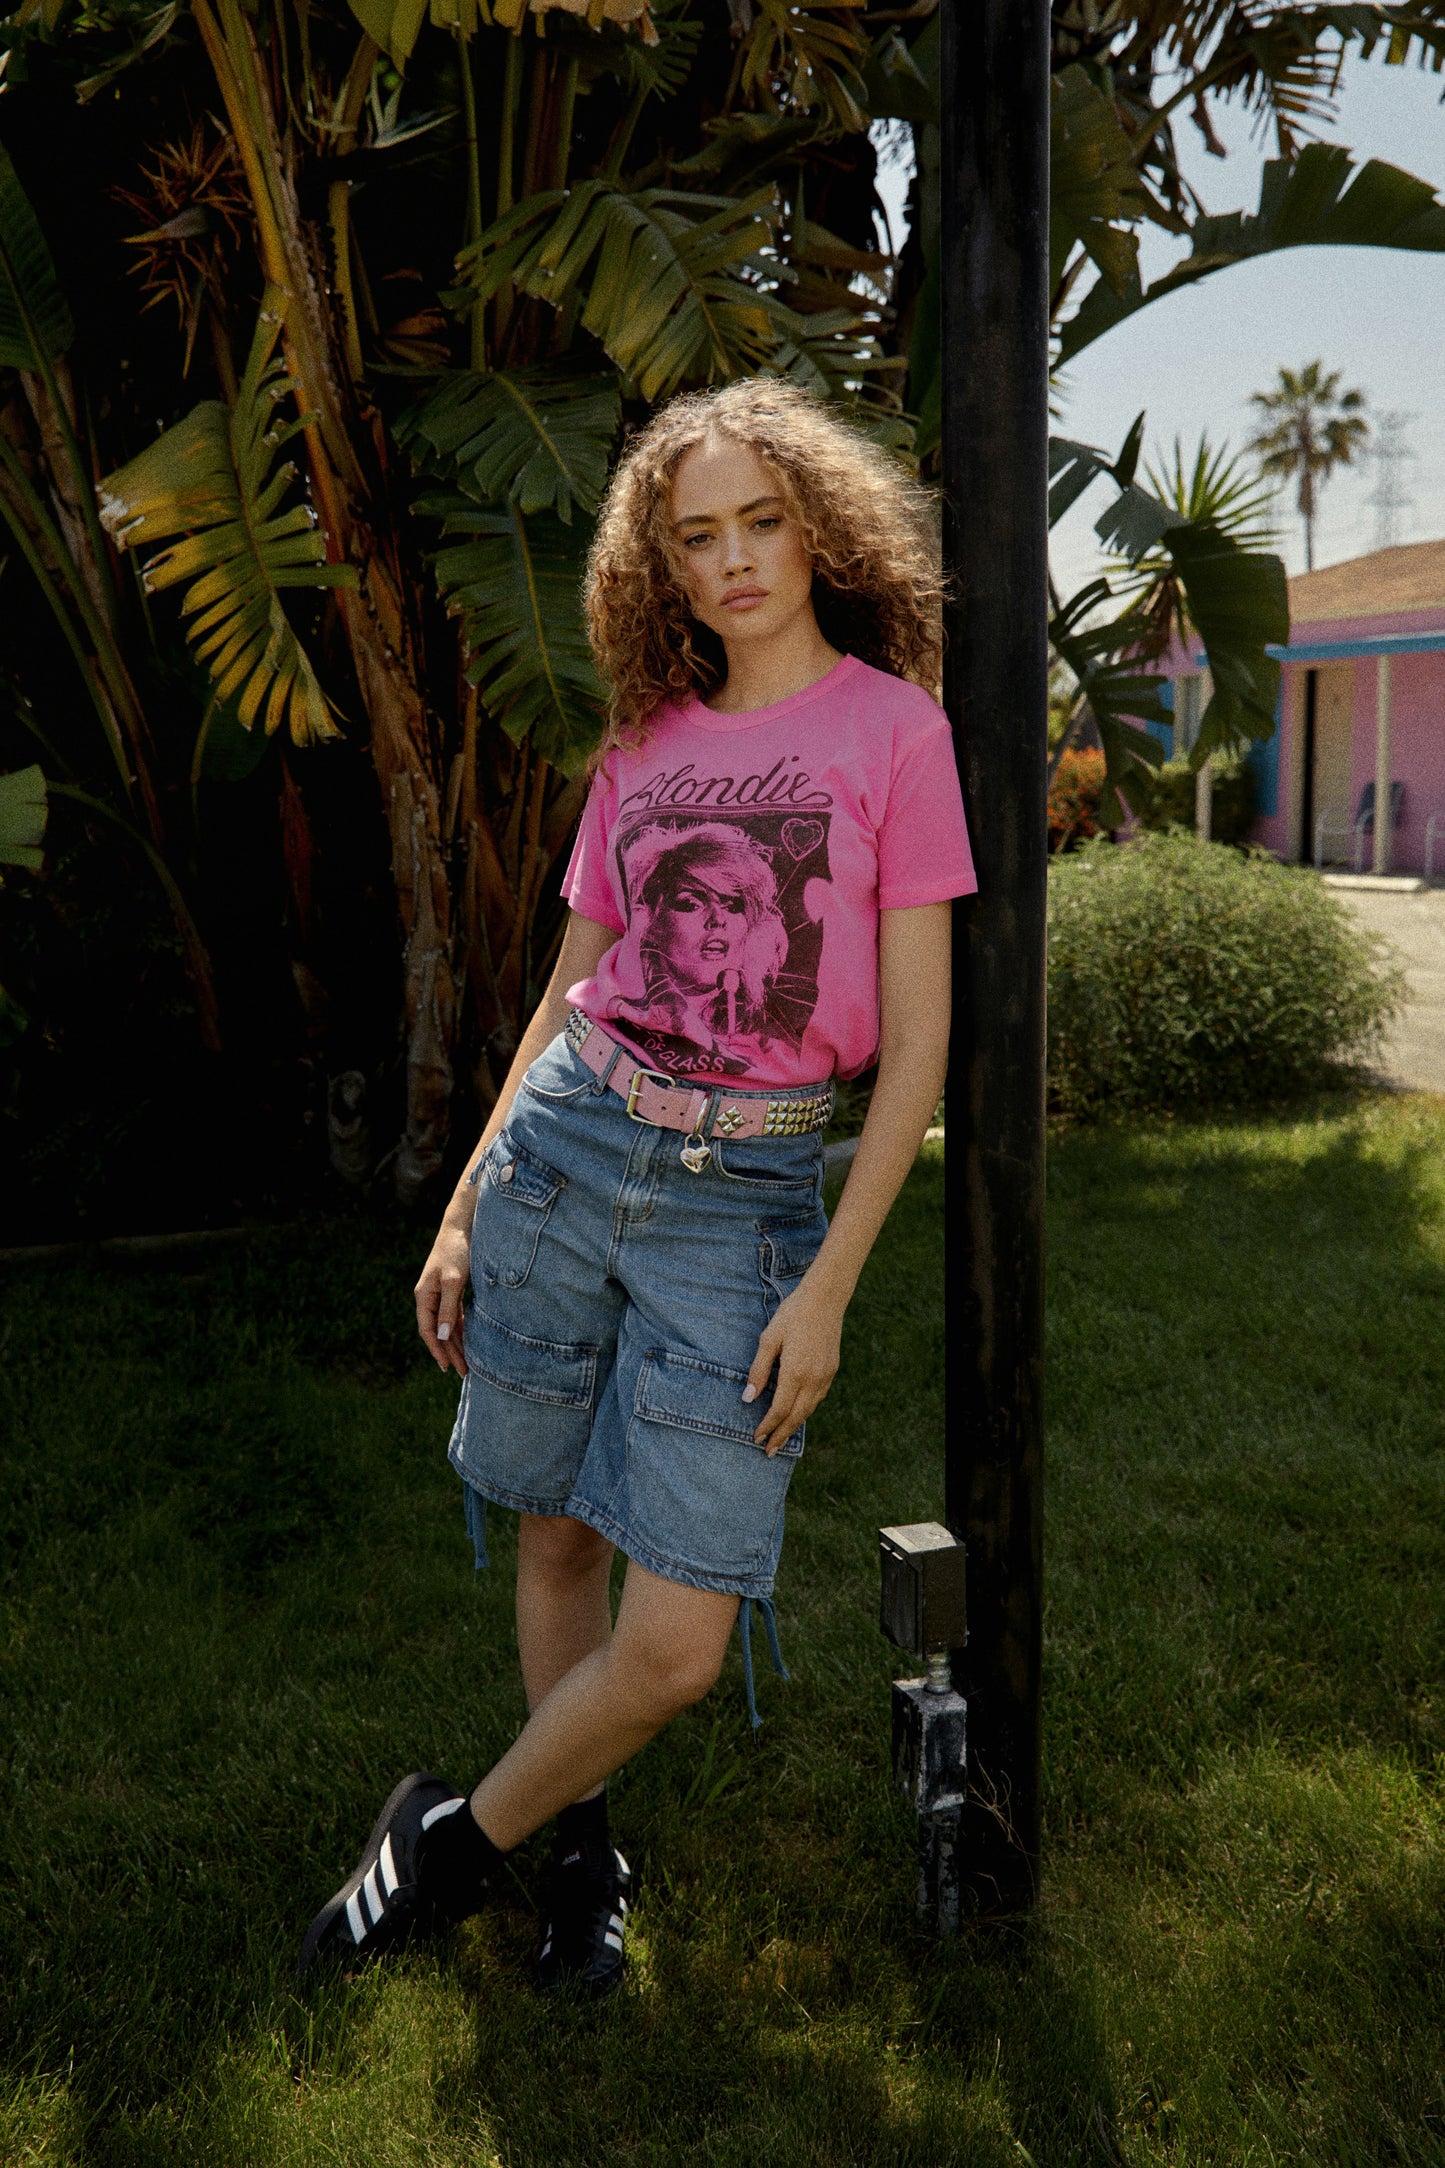 Model wearing Blondie graphic tee in pink with "Heart Of Glass" artwork on front.